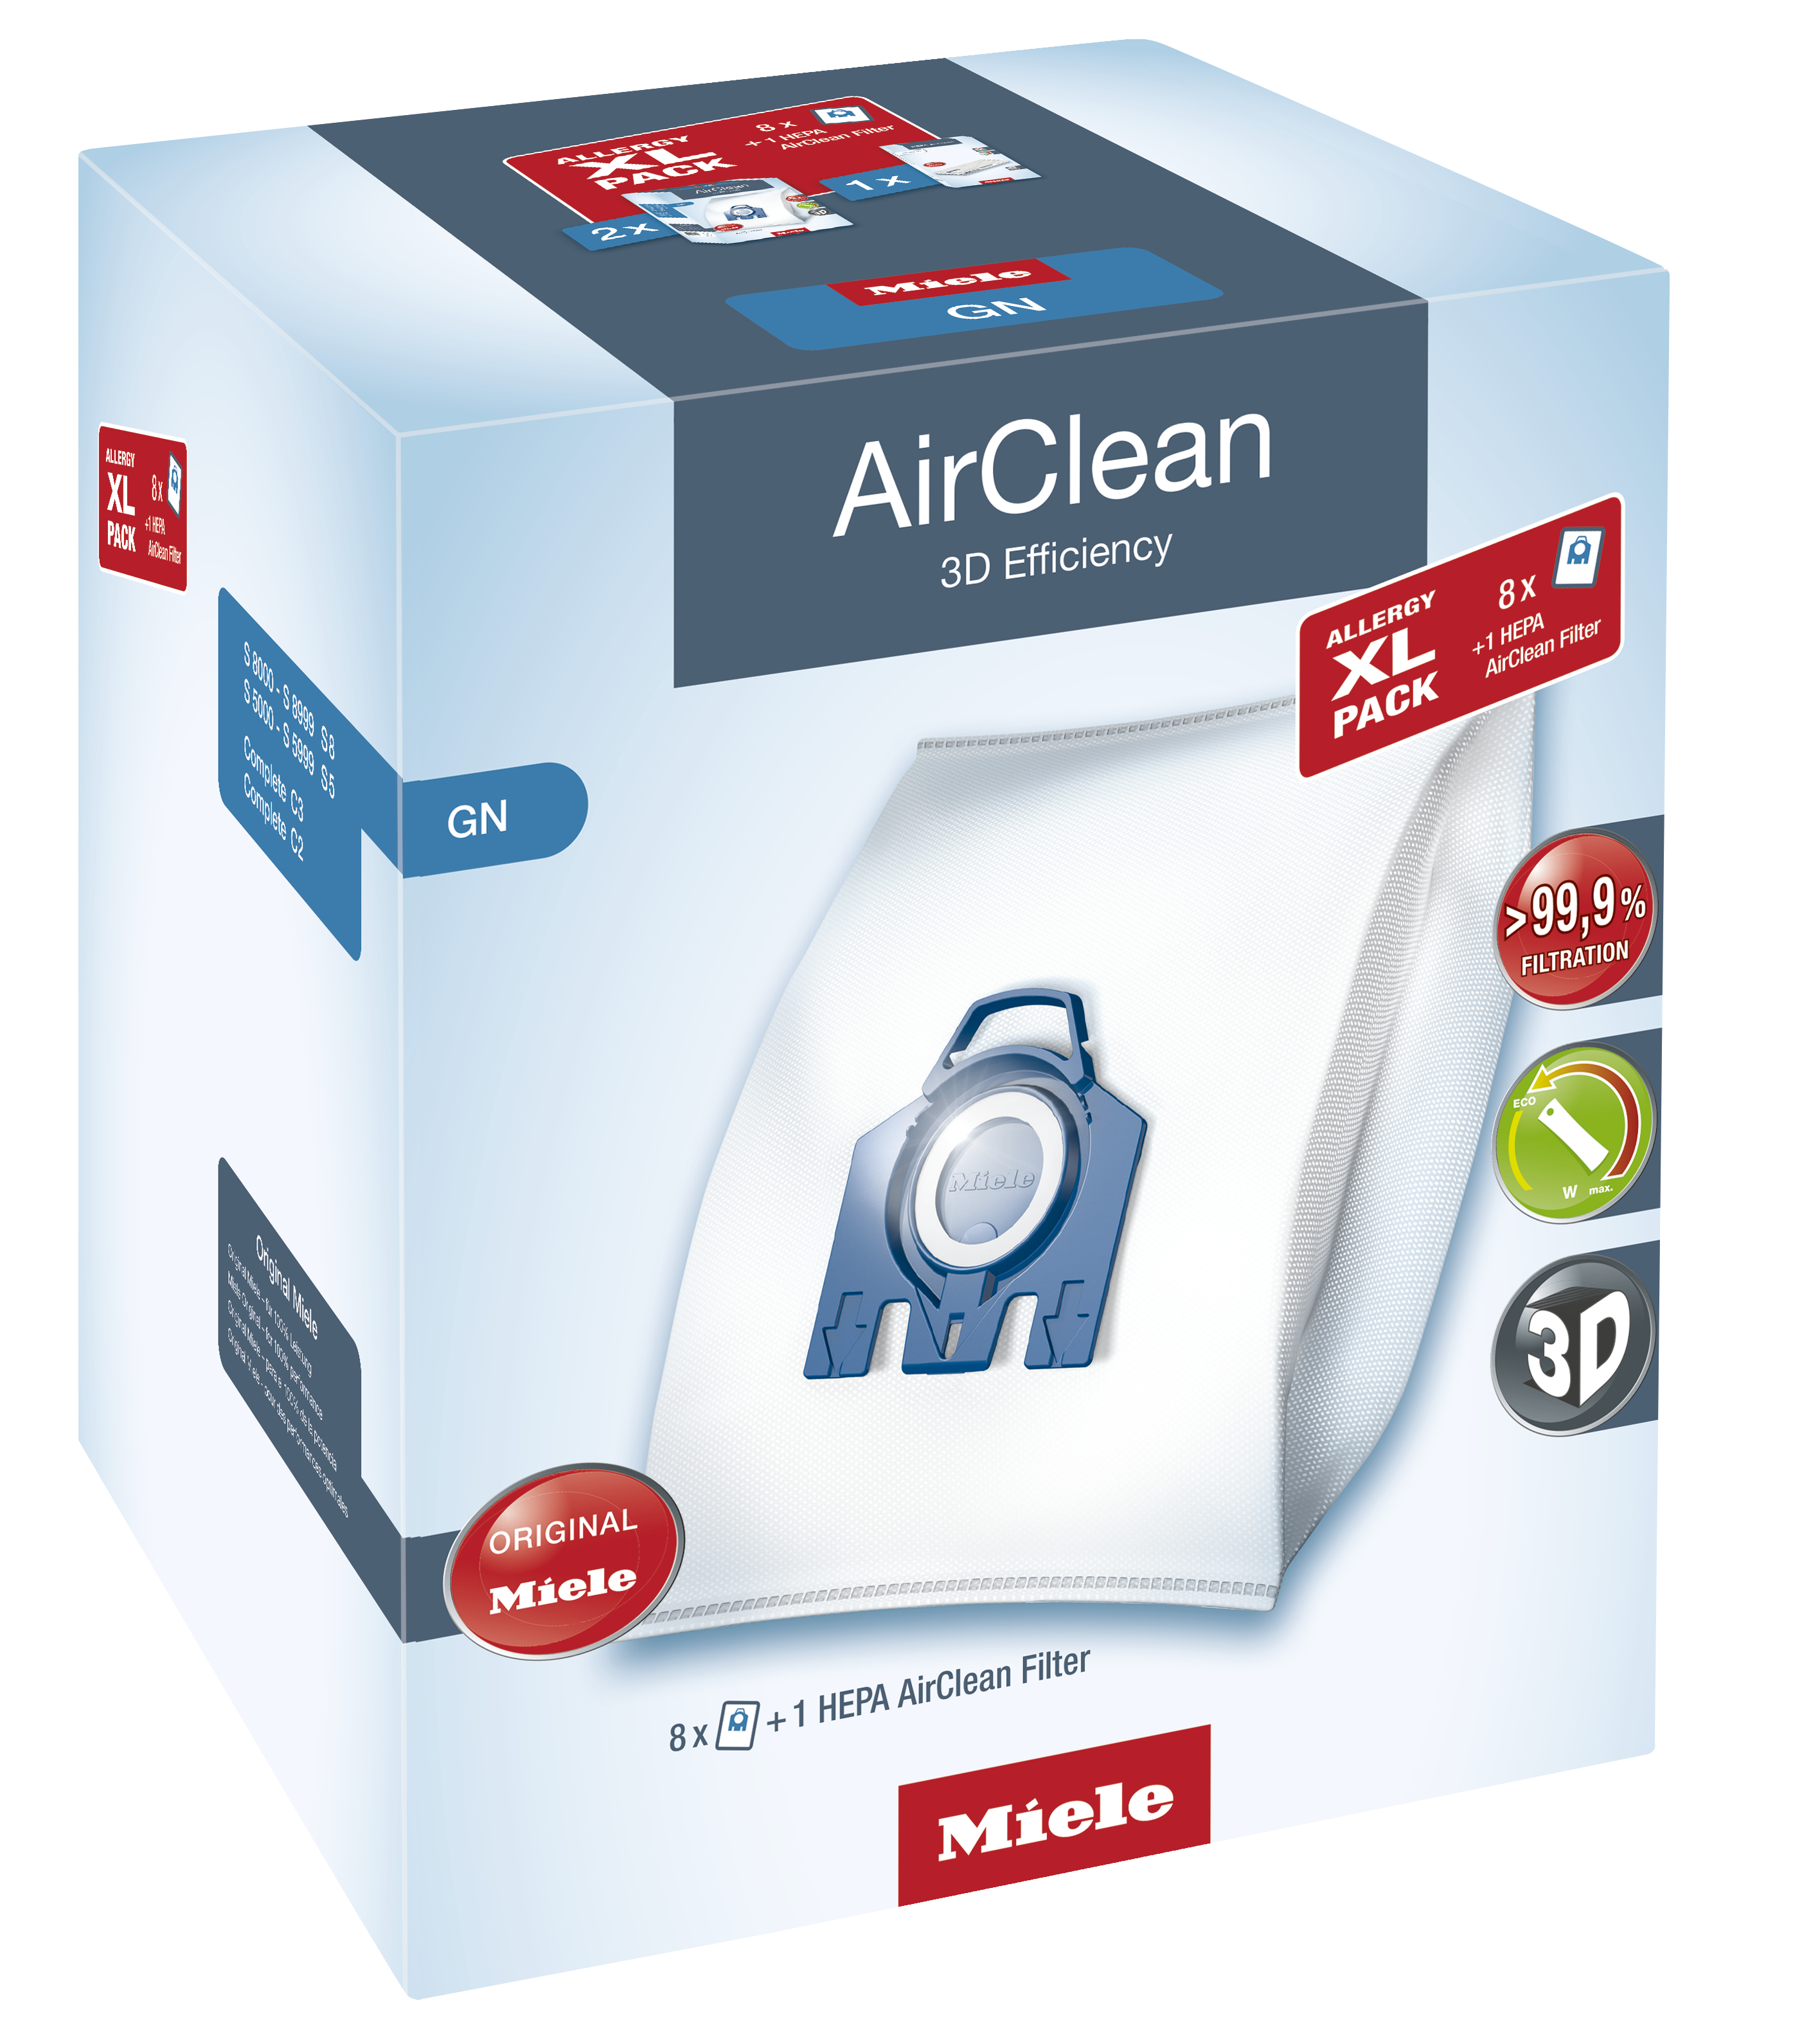 Miele GN Allergy XL Pack